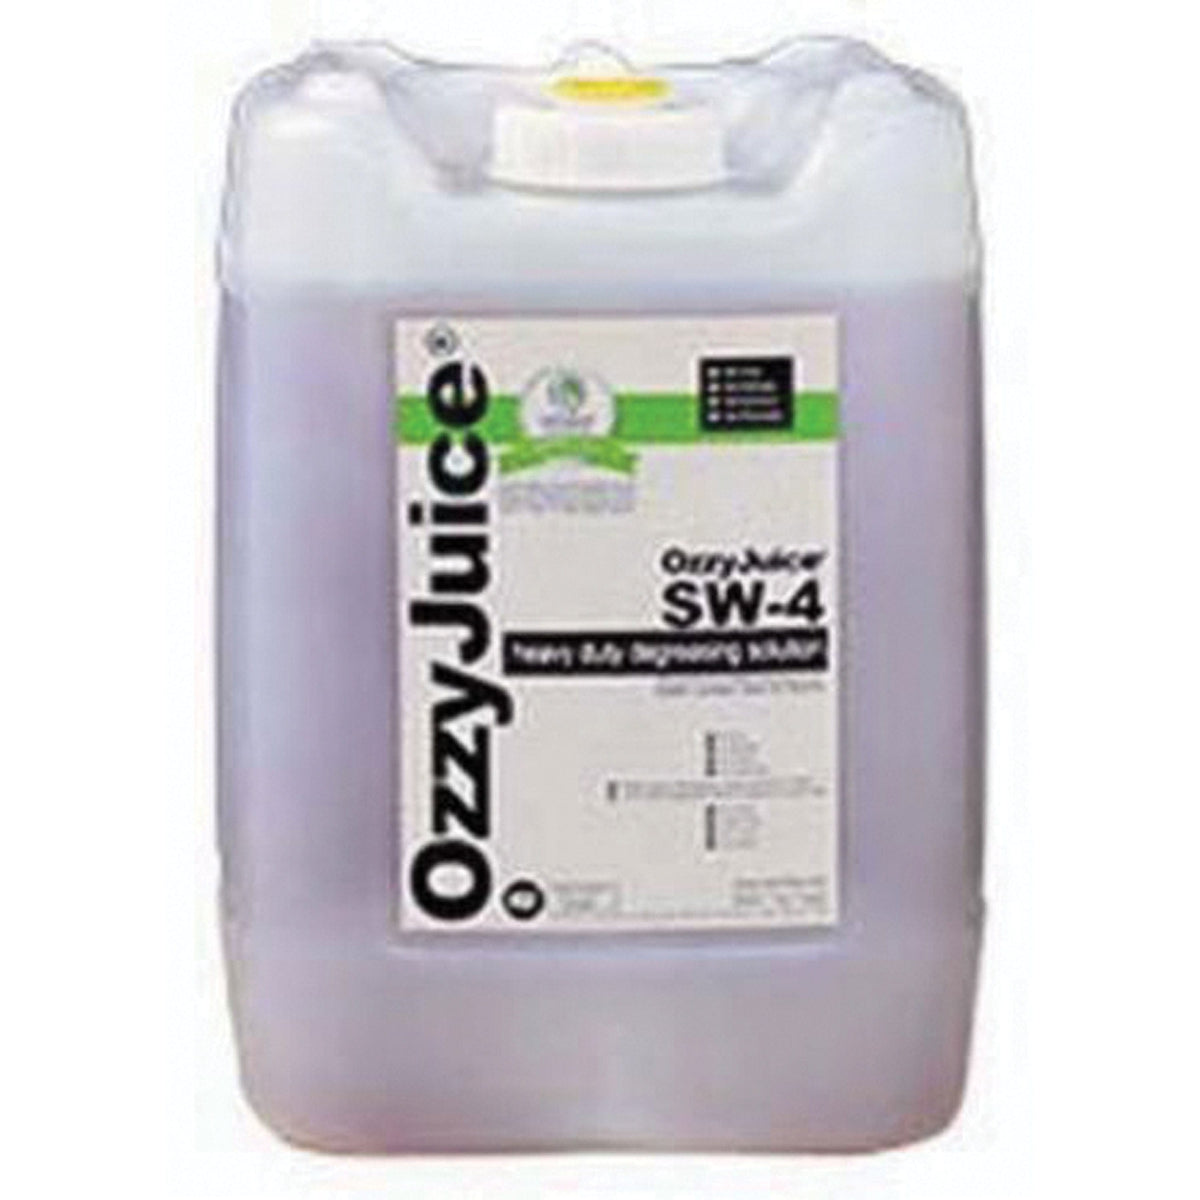 CRC Industries Oversized - Not Qualified for Free Shipping CRC OzzyJuice HD Degreasing Solution #14148